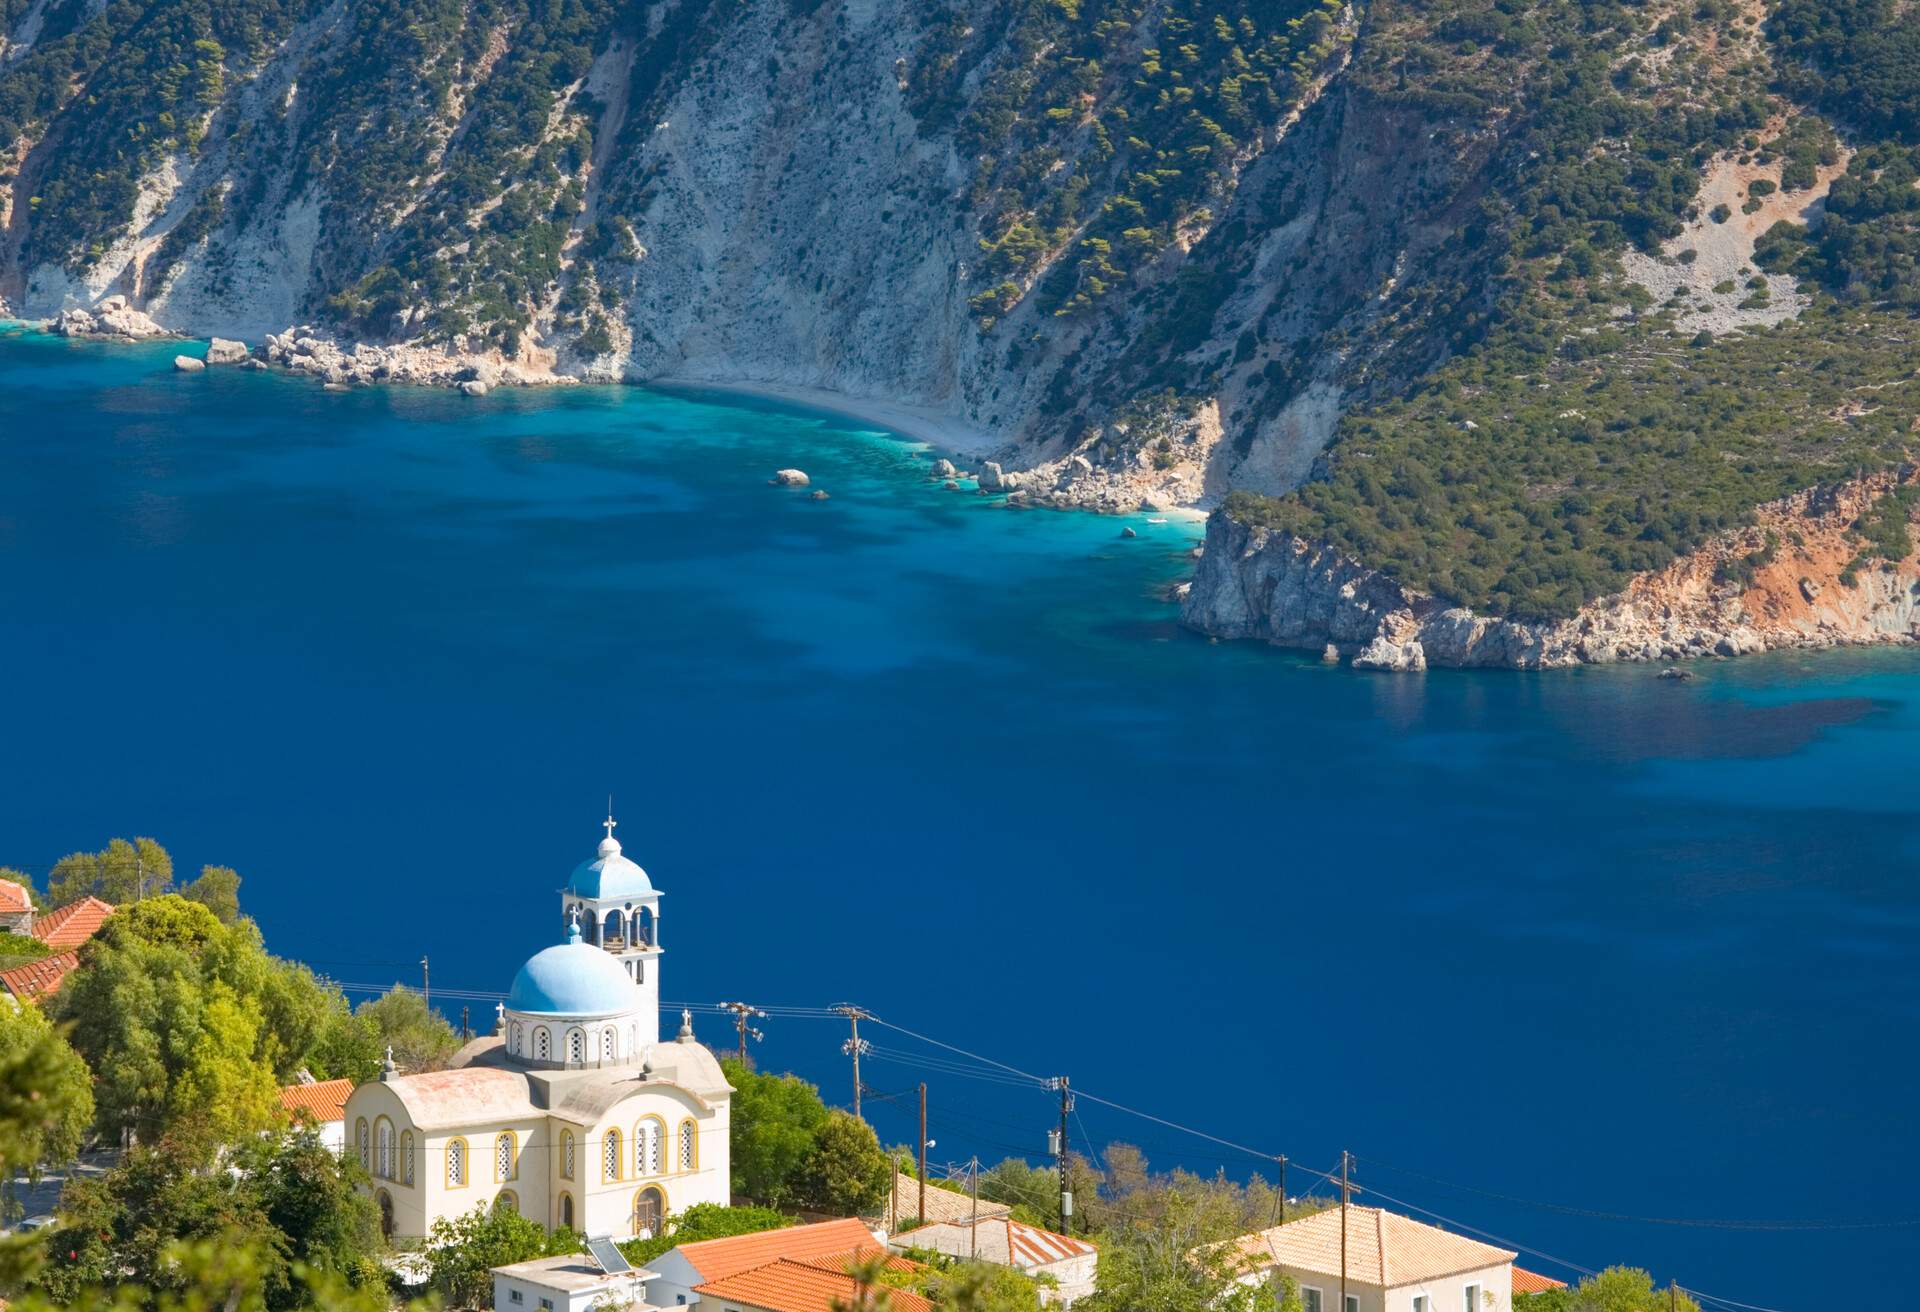 Village houses and church precariously perched above the deep blue waters of Afales Bay, Exogi, Ithaca (aka Ithaki, Ithaka), Ionian Islands, Greece, Europe.